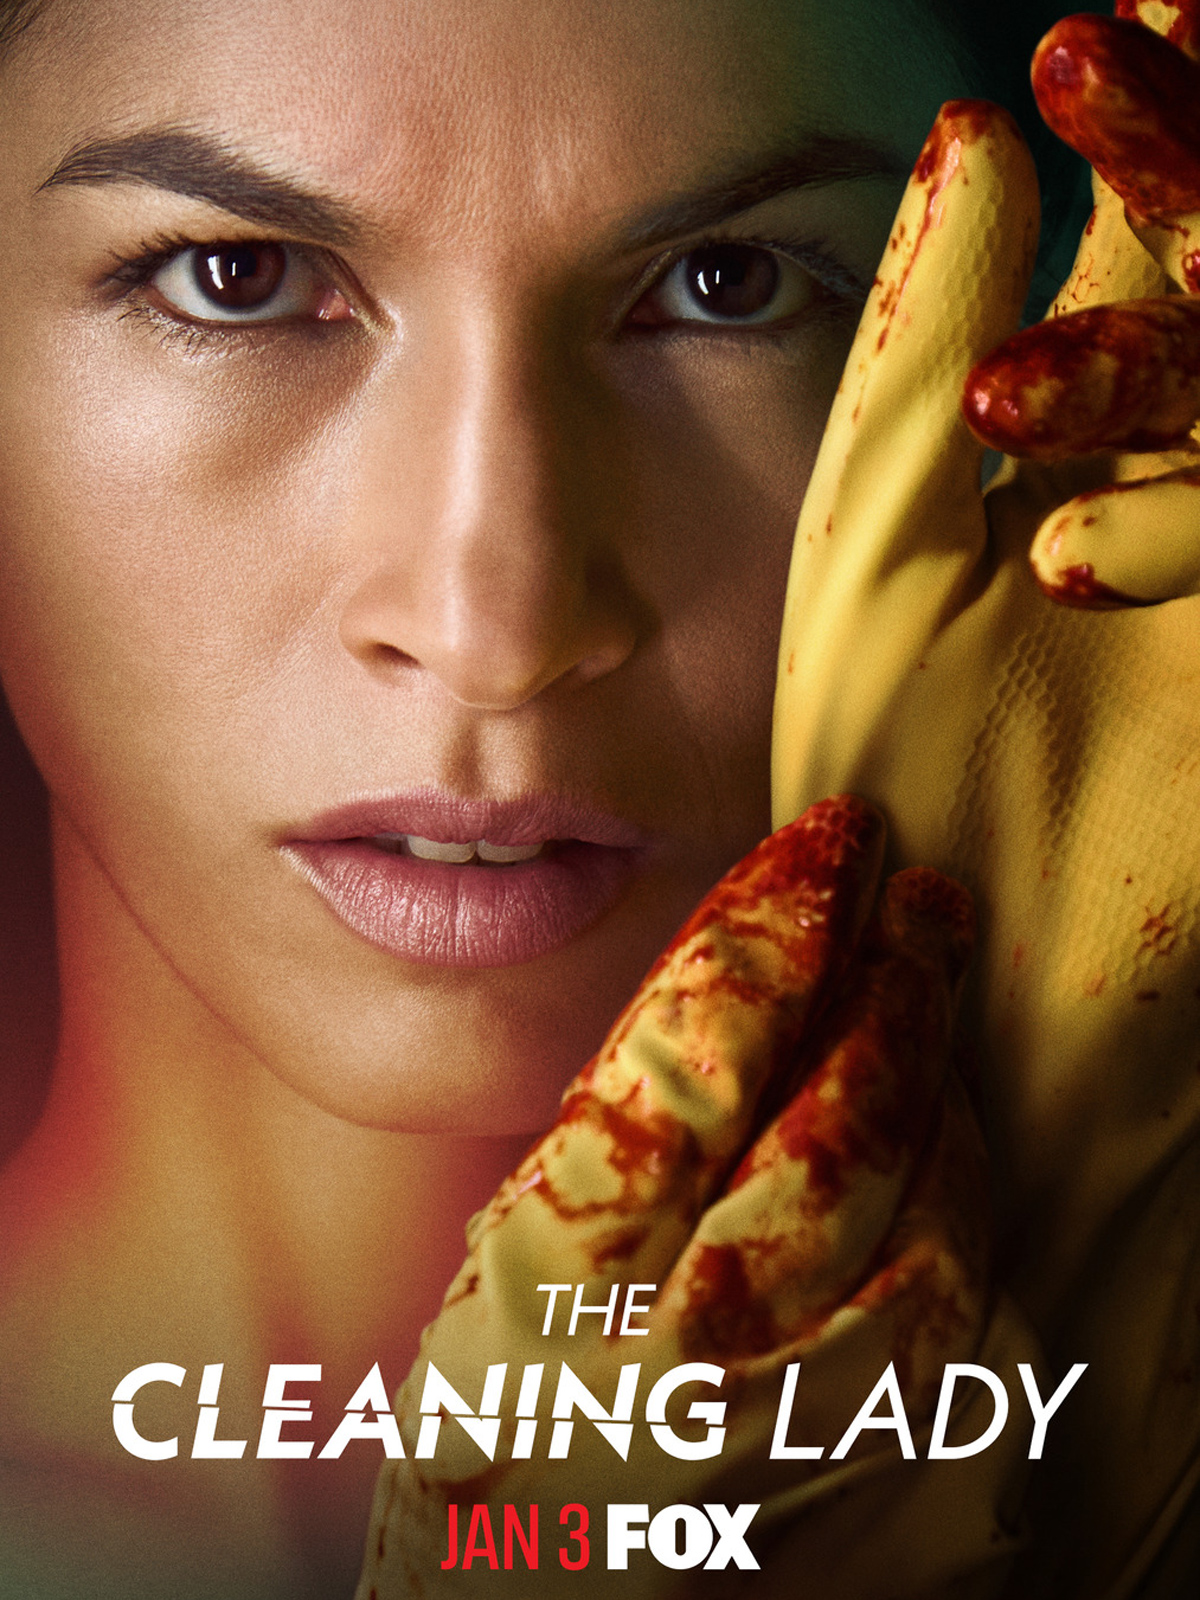 The Cleaning Lady - Série TV 2022 streaming VF gratuit complet